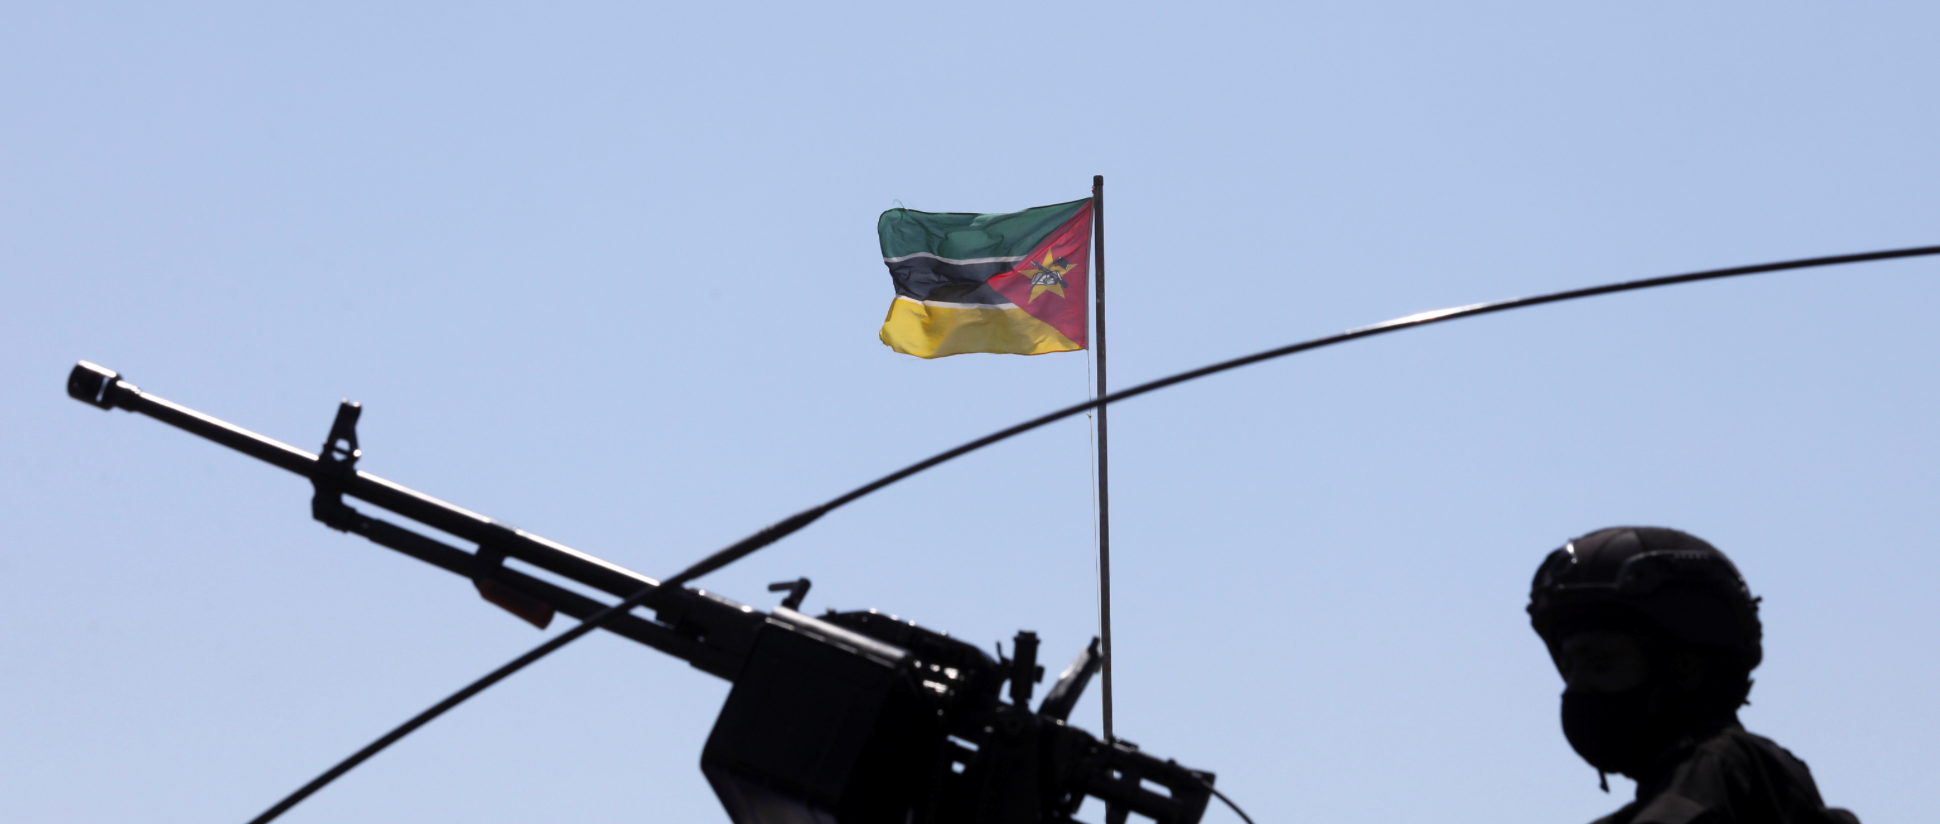 Mozambican forces kill islamist insurgent leader Omar, ministry says